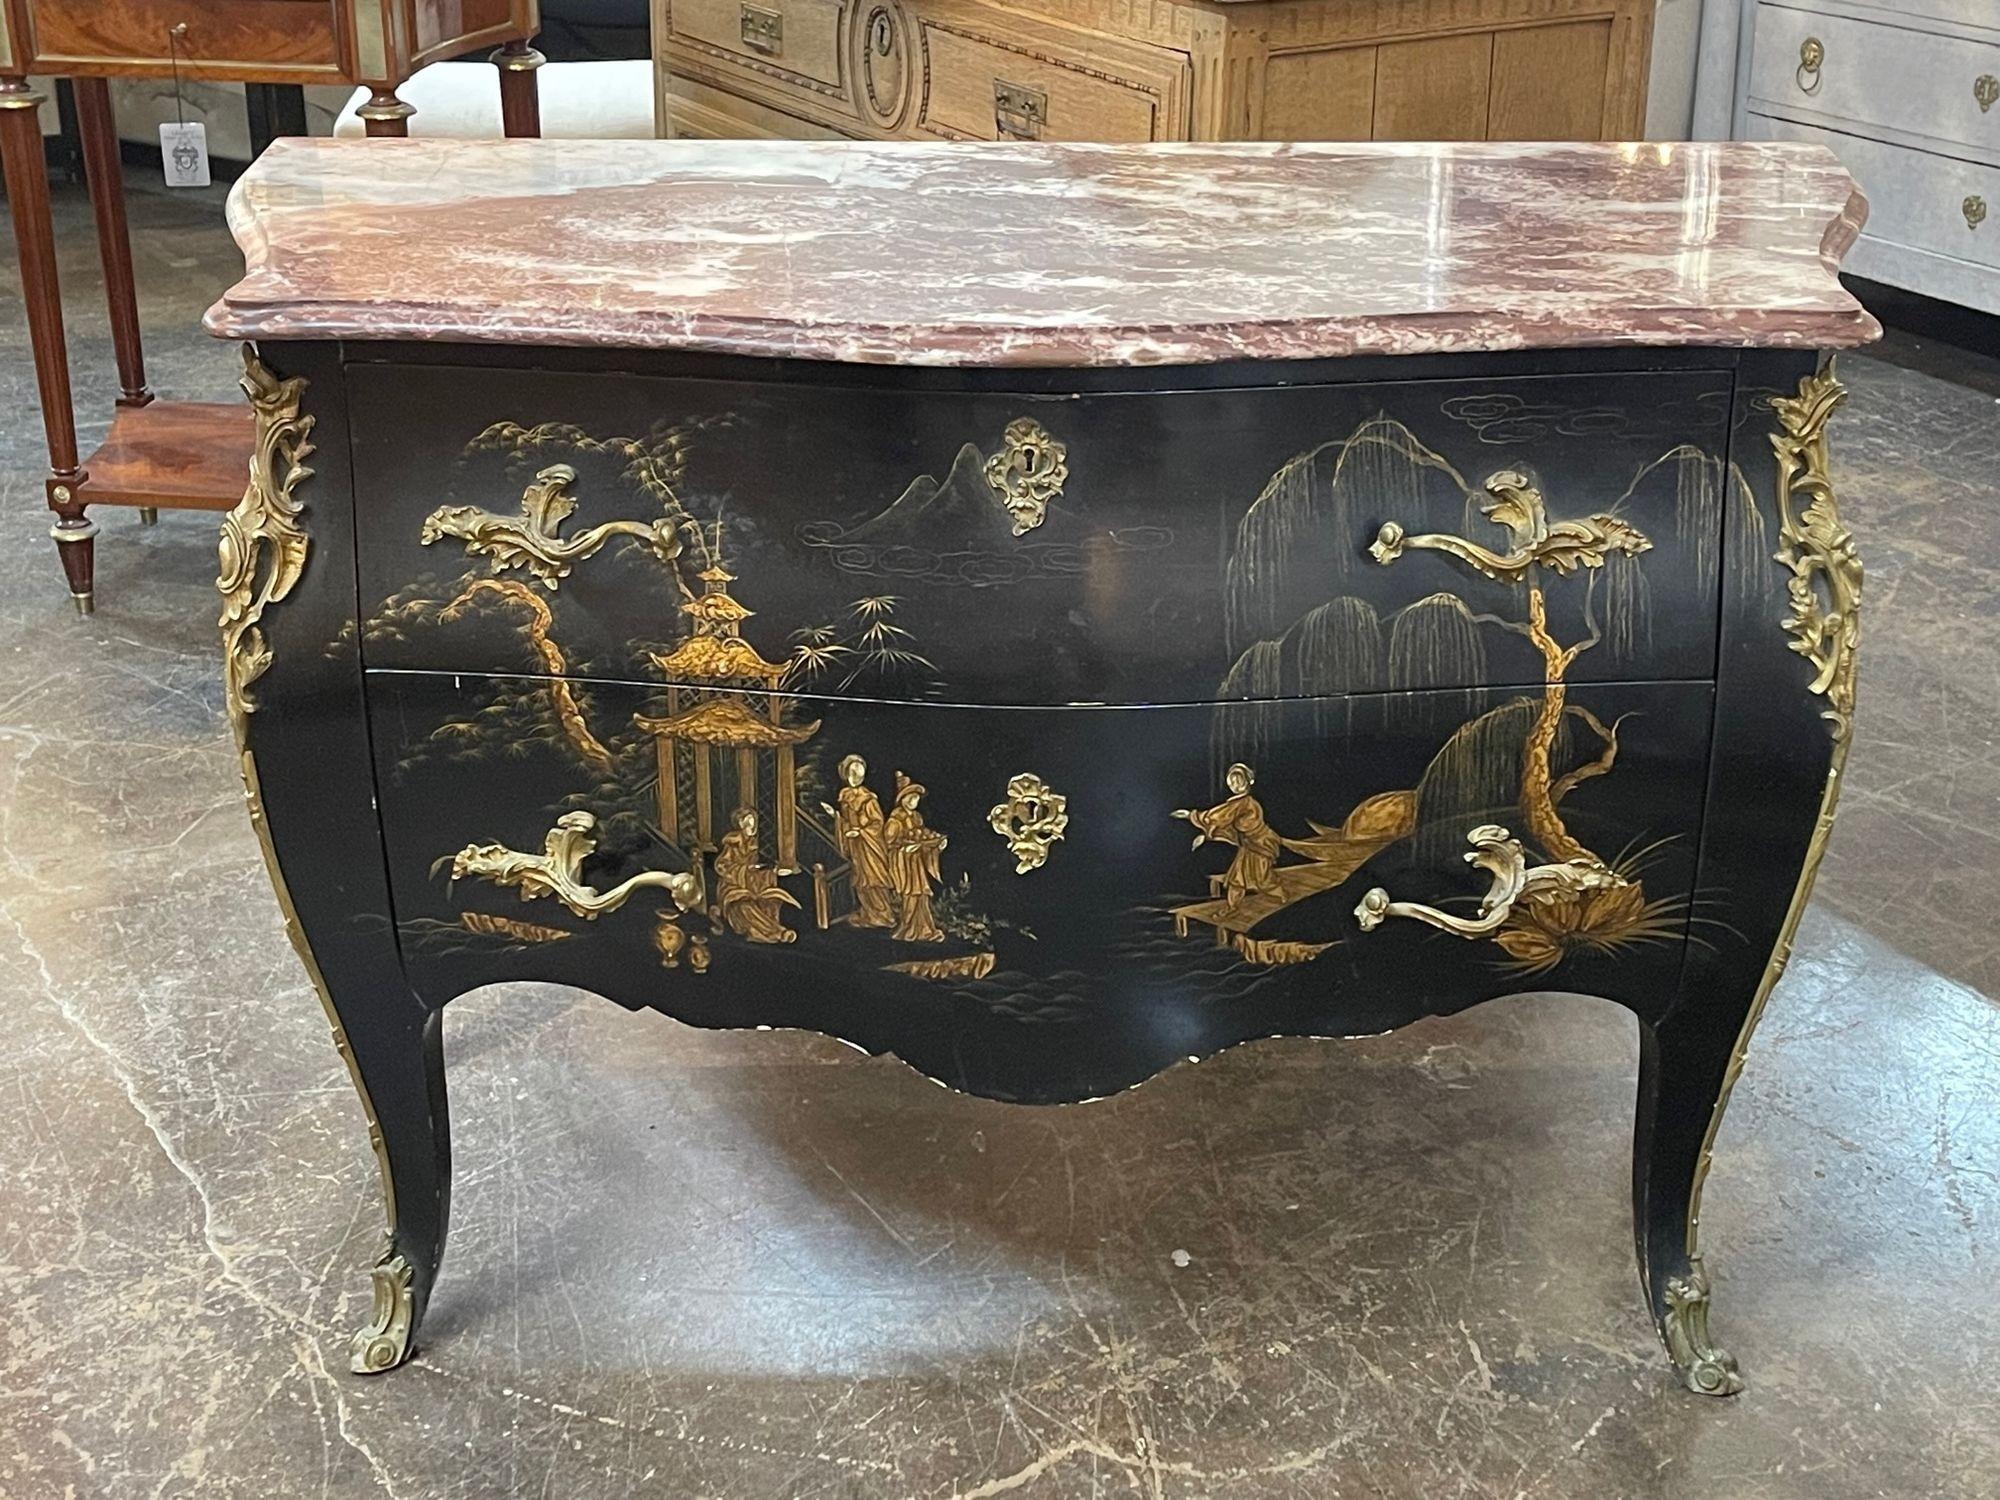 Elegant 19th century French Louis XV style Chinoiserie commode with marble top. This piece has exceptional hand painted designs and lovely bronze mounts. A true work of art!